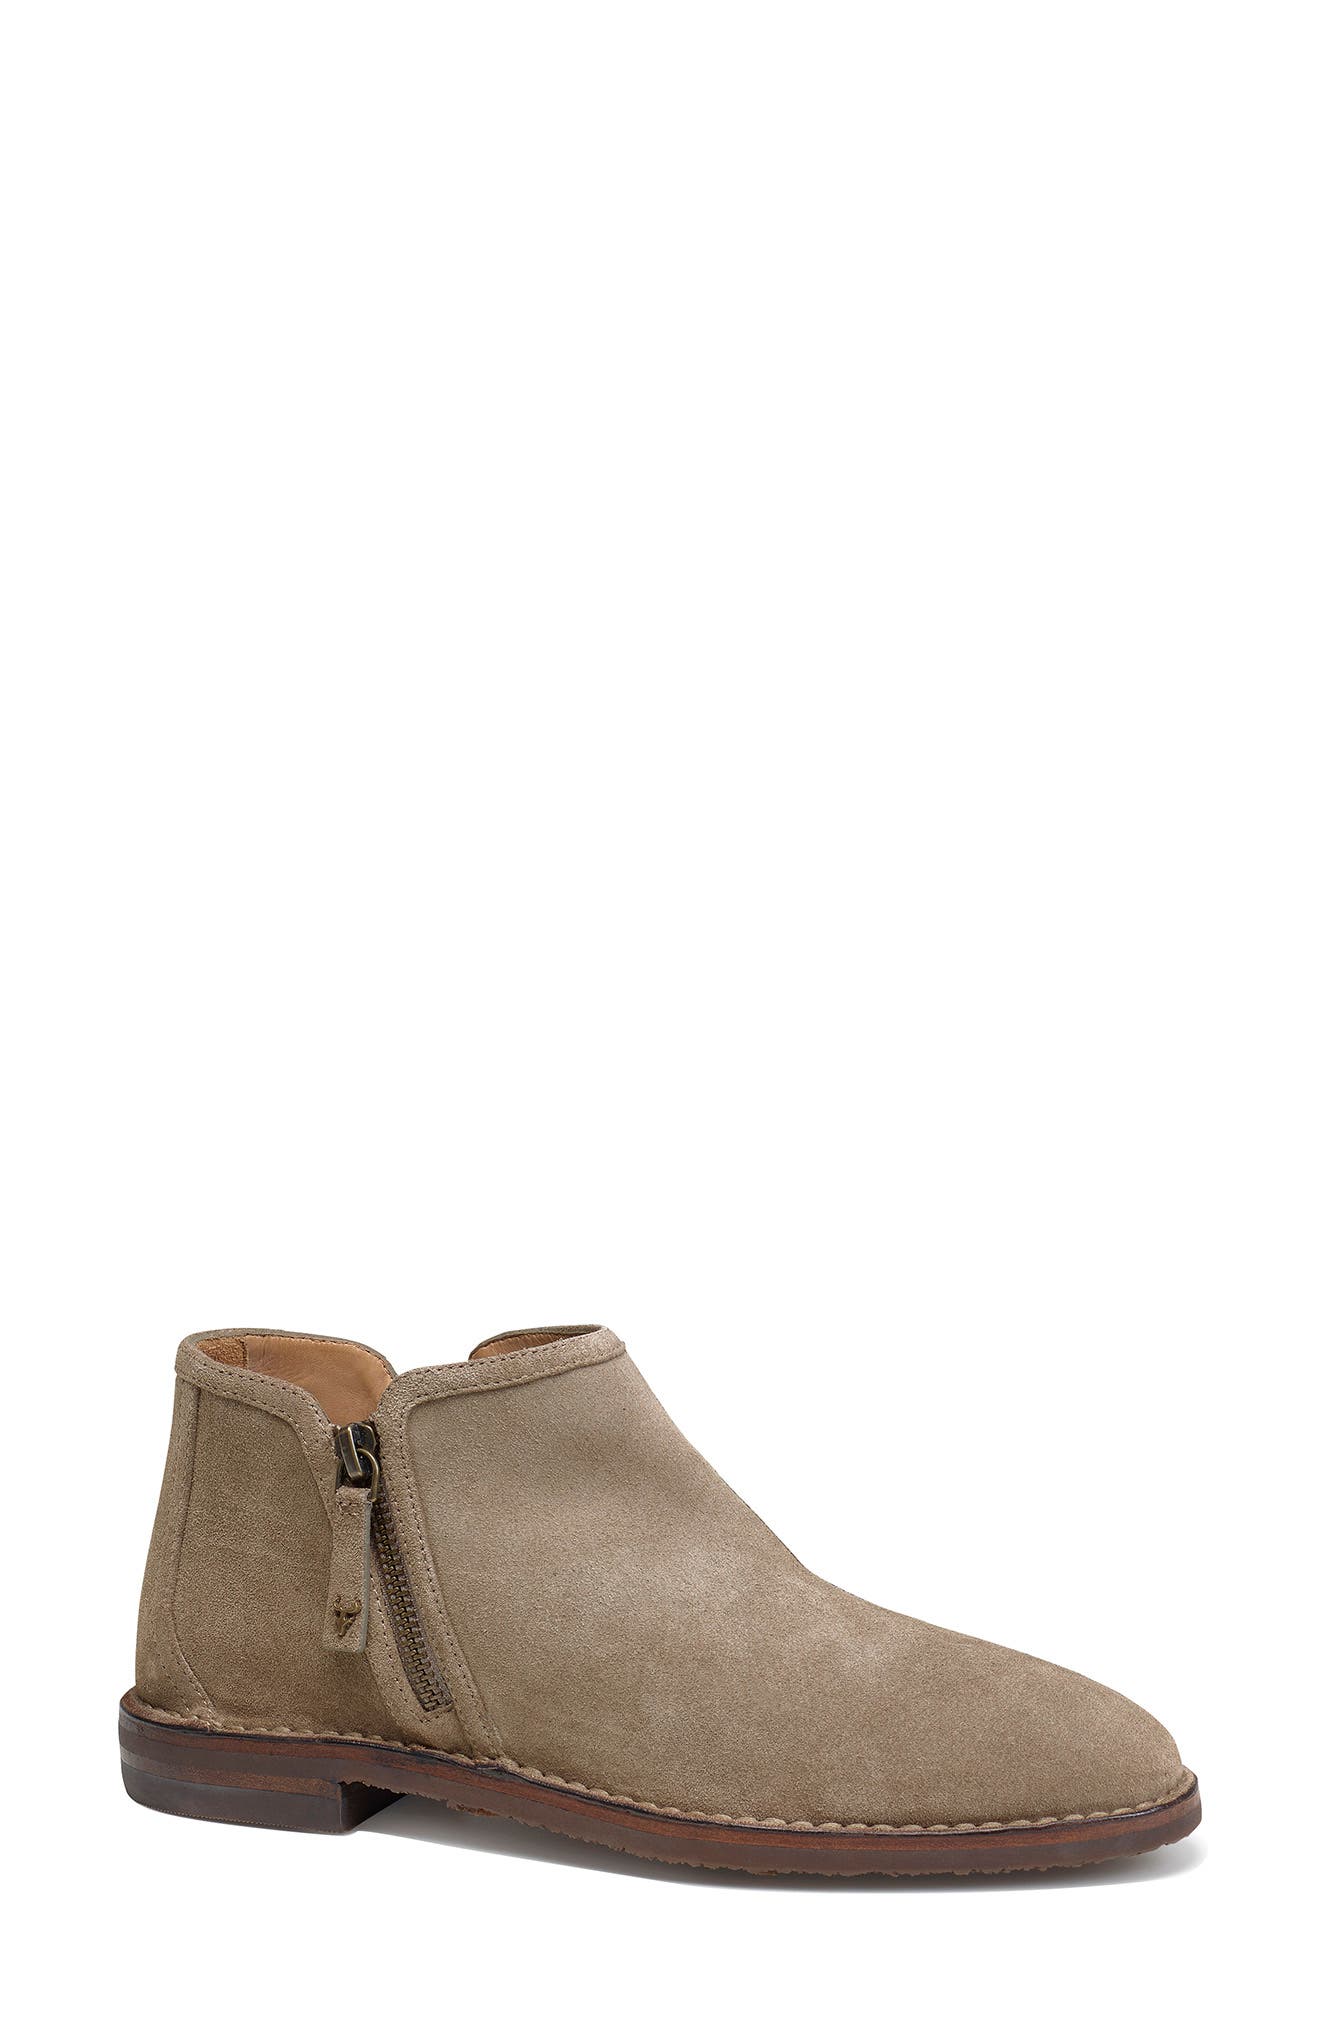 trask womens boots